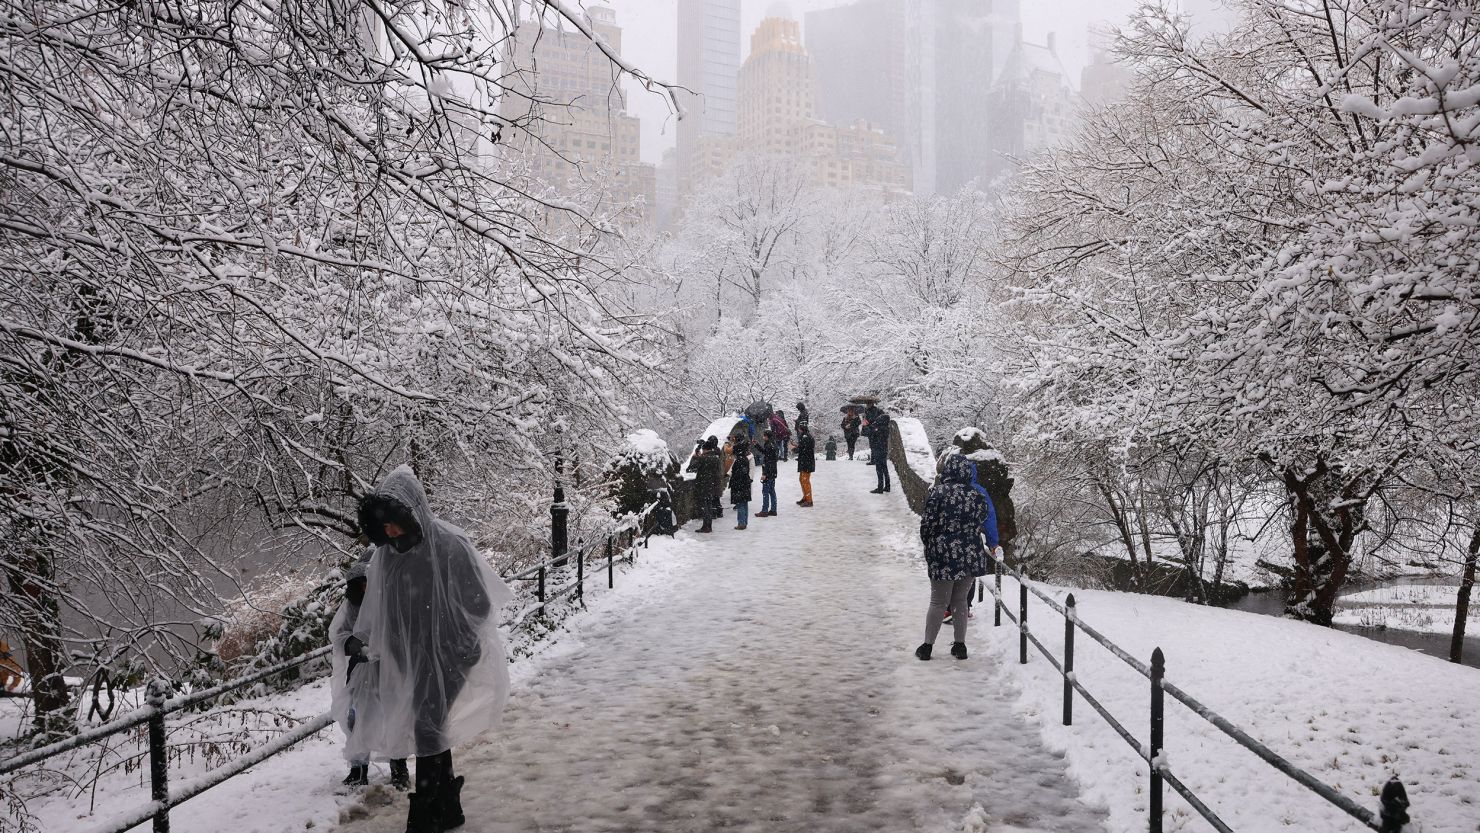 People walk through the falling snow in Central Park on Tuesday, February 13, in New York.